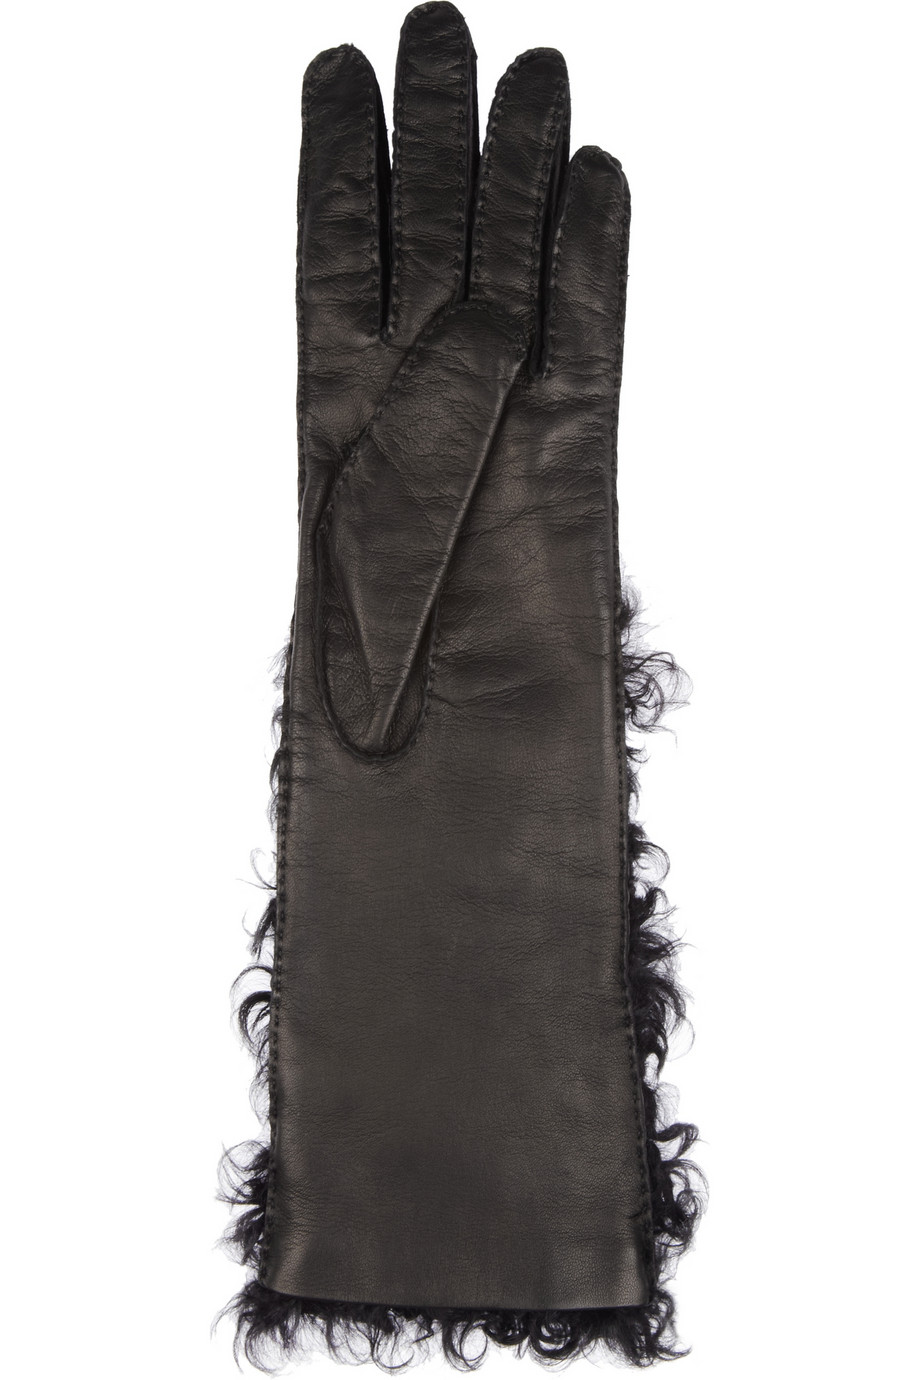 Dolce & Gabbana Leather and Shearling Gloves in Black - Lyst